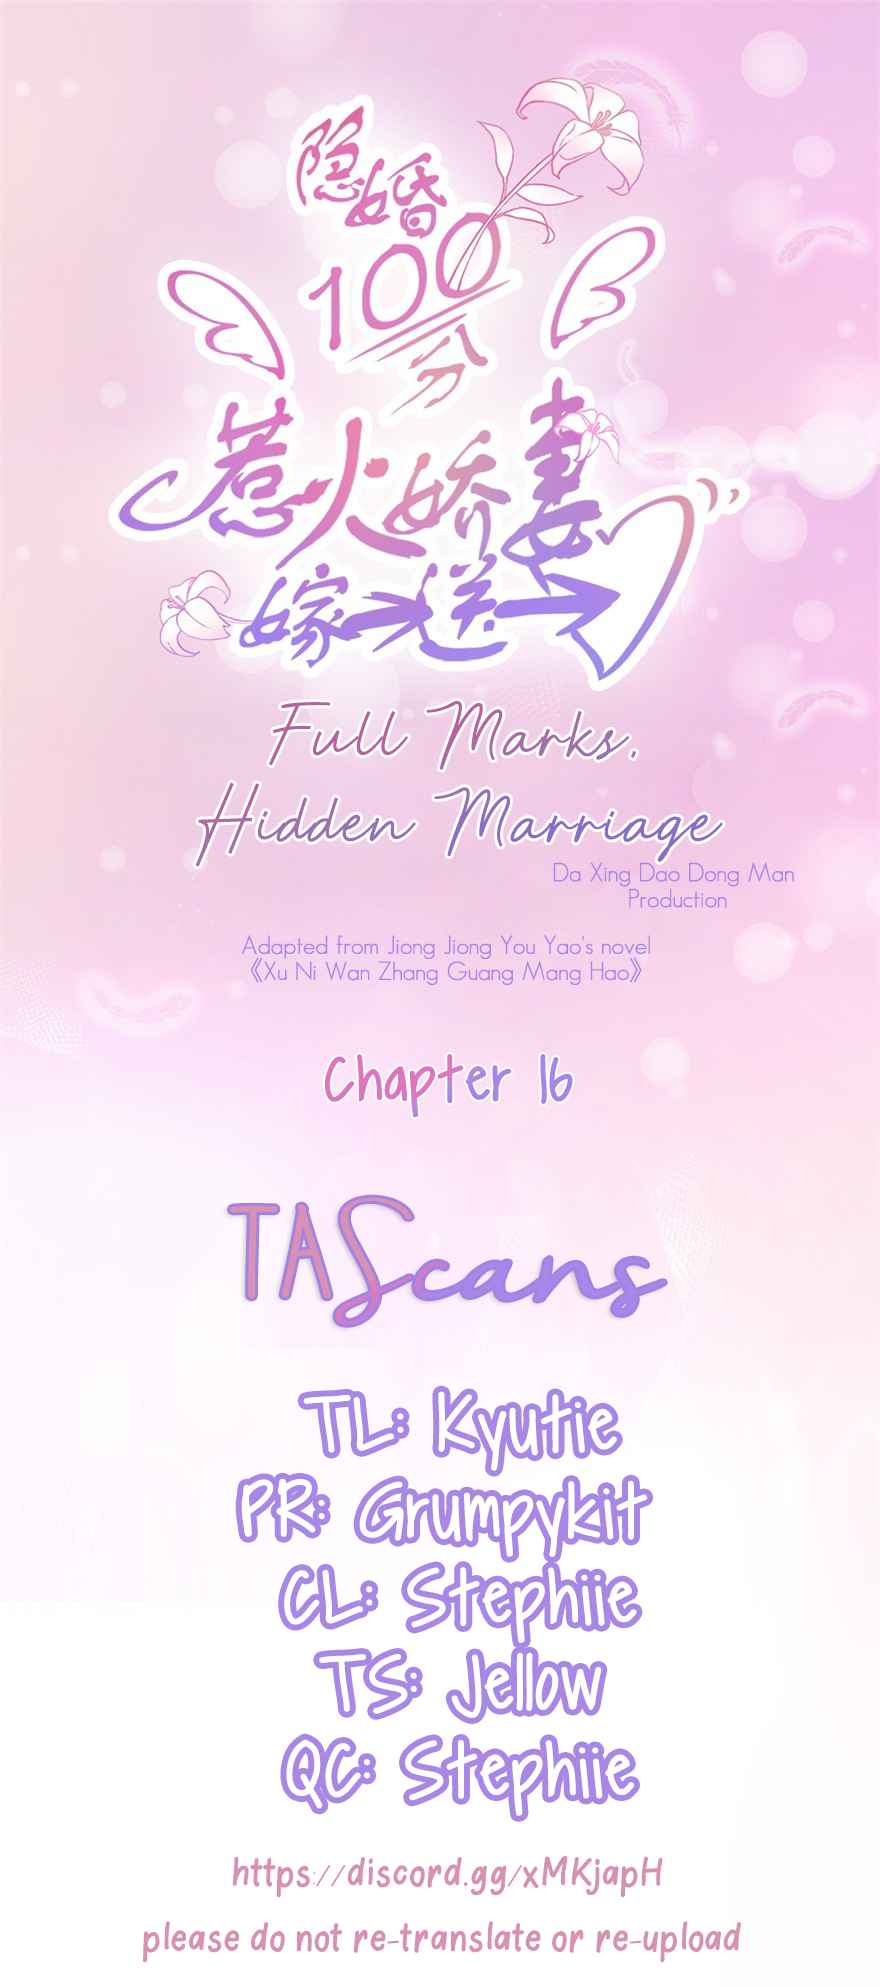 Full Marks, Hidden Marriage (大行道动漫) Ch. 16 You've Already Done Well